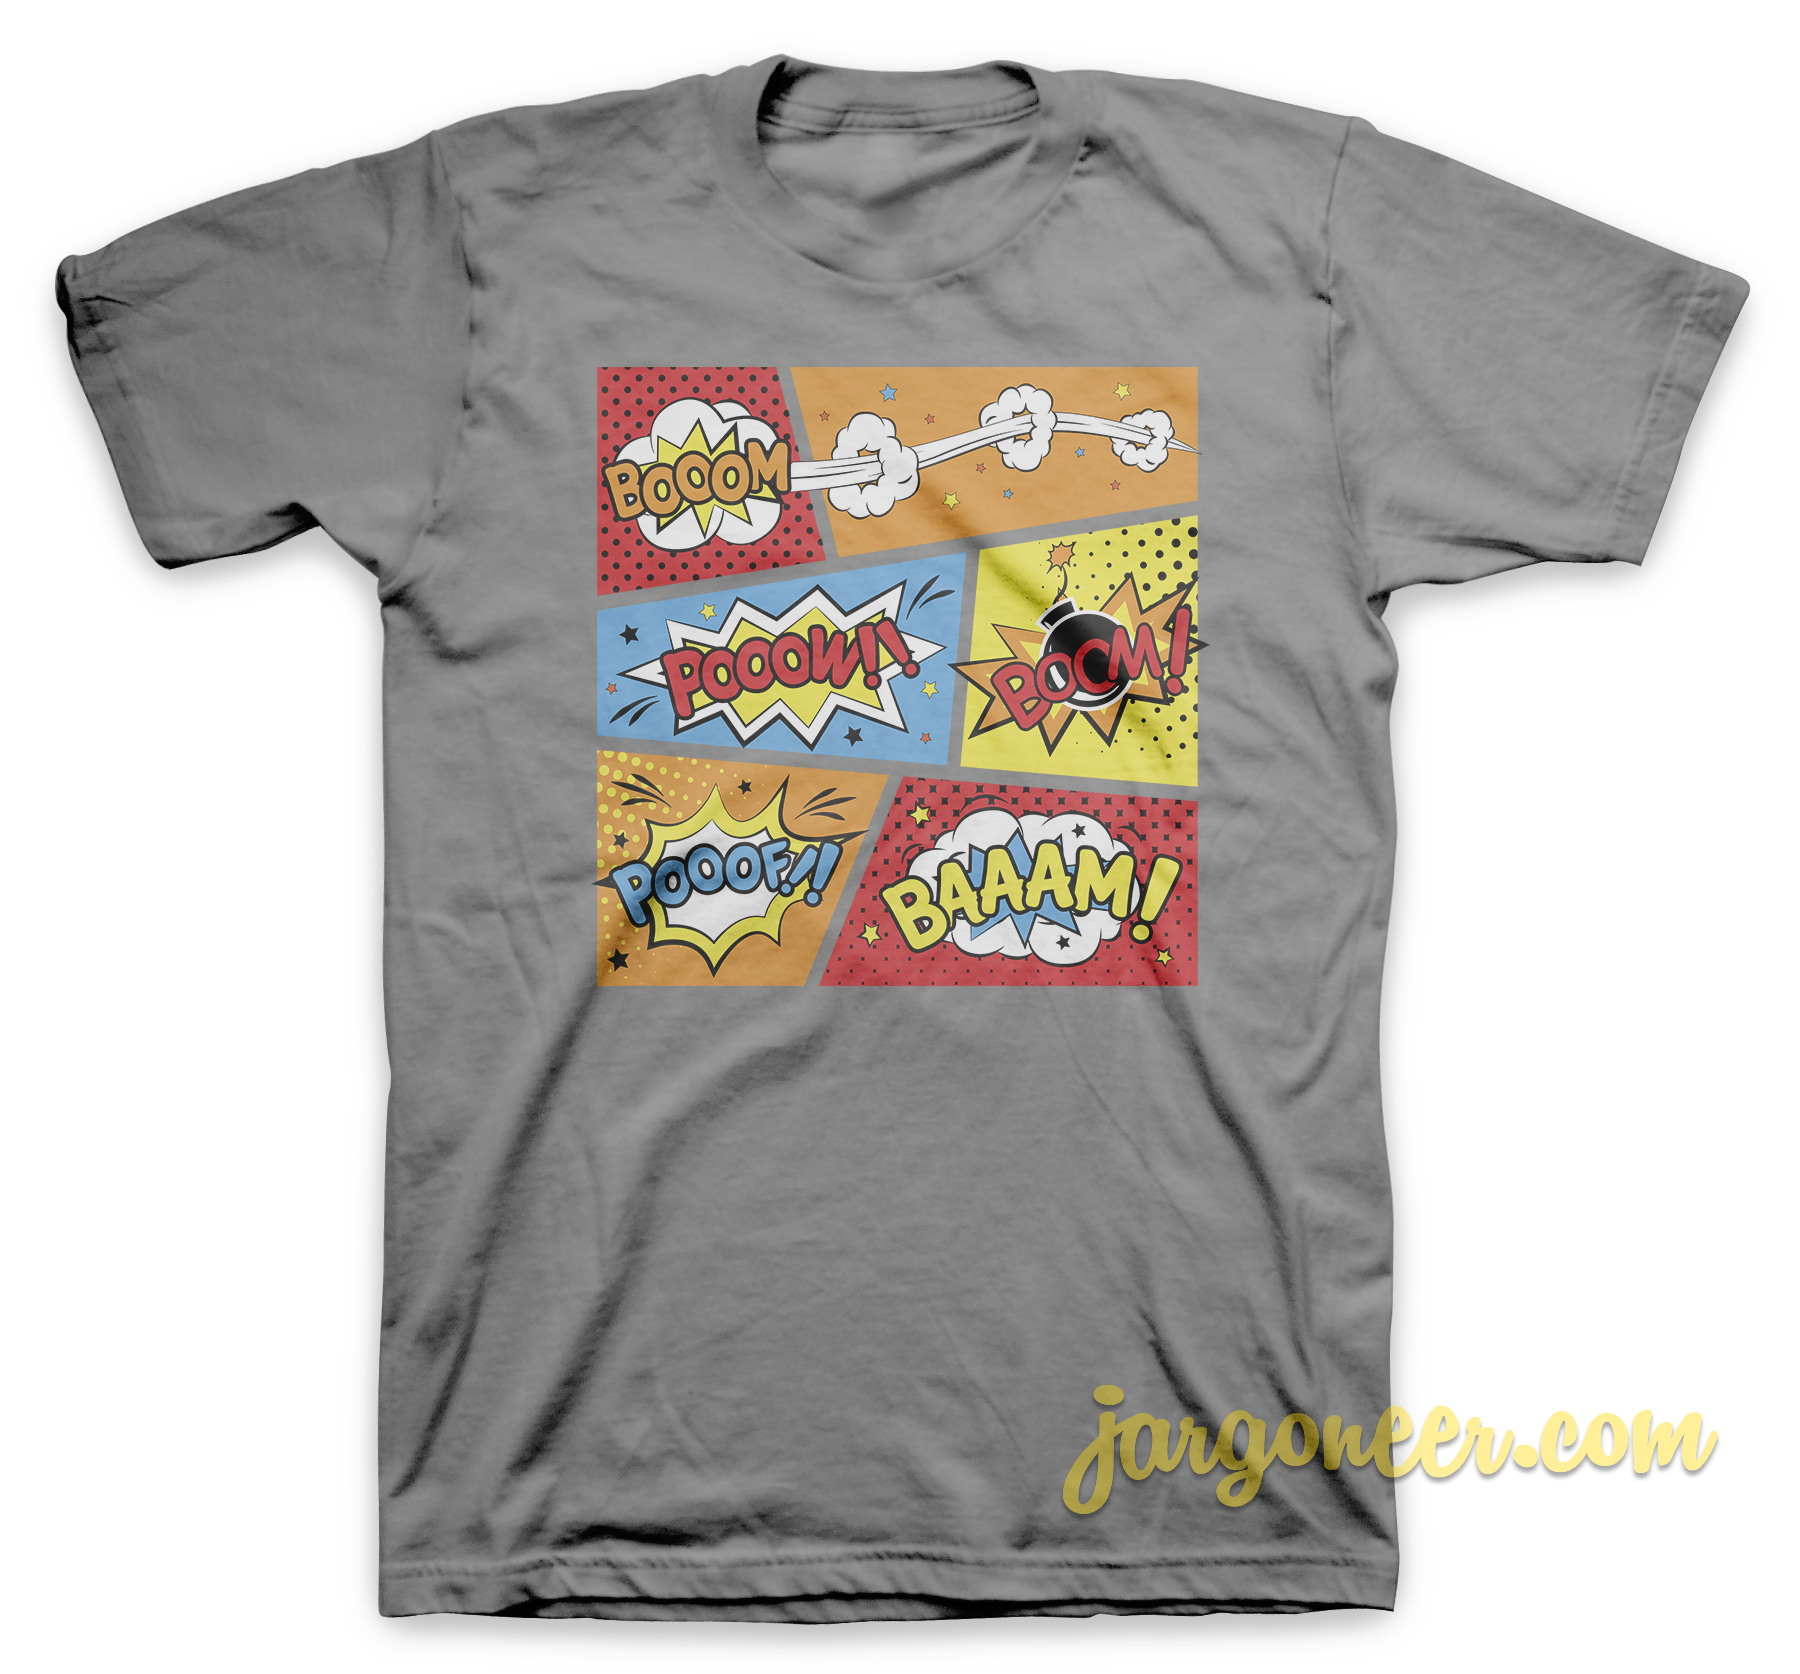 4,207 Plain Tee Shirt Cartoon High Res Illustrations - Getty Images